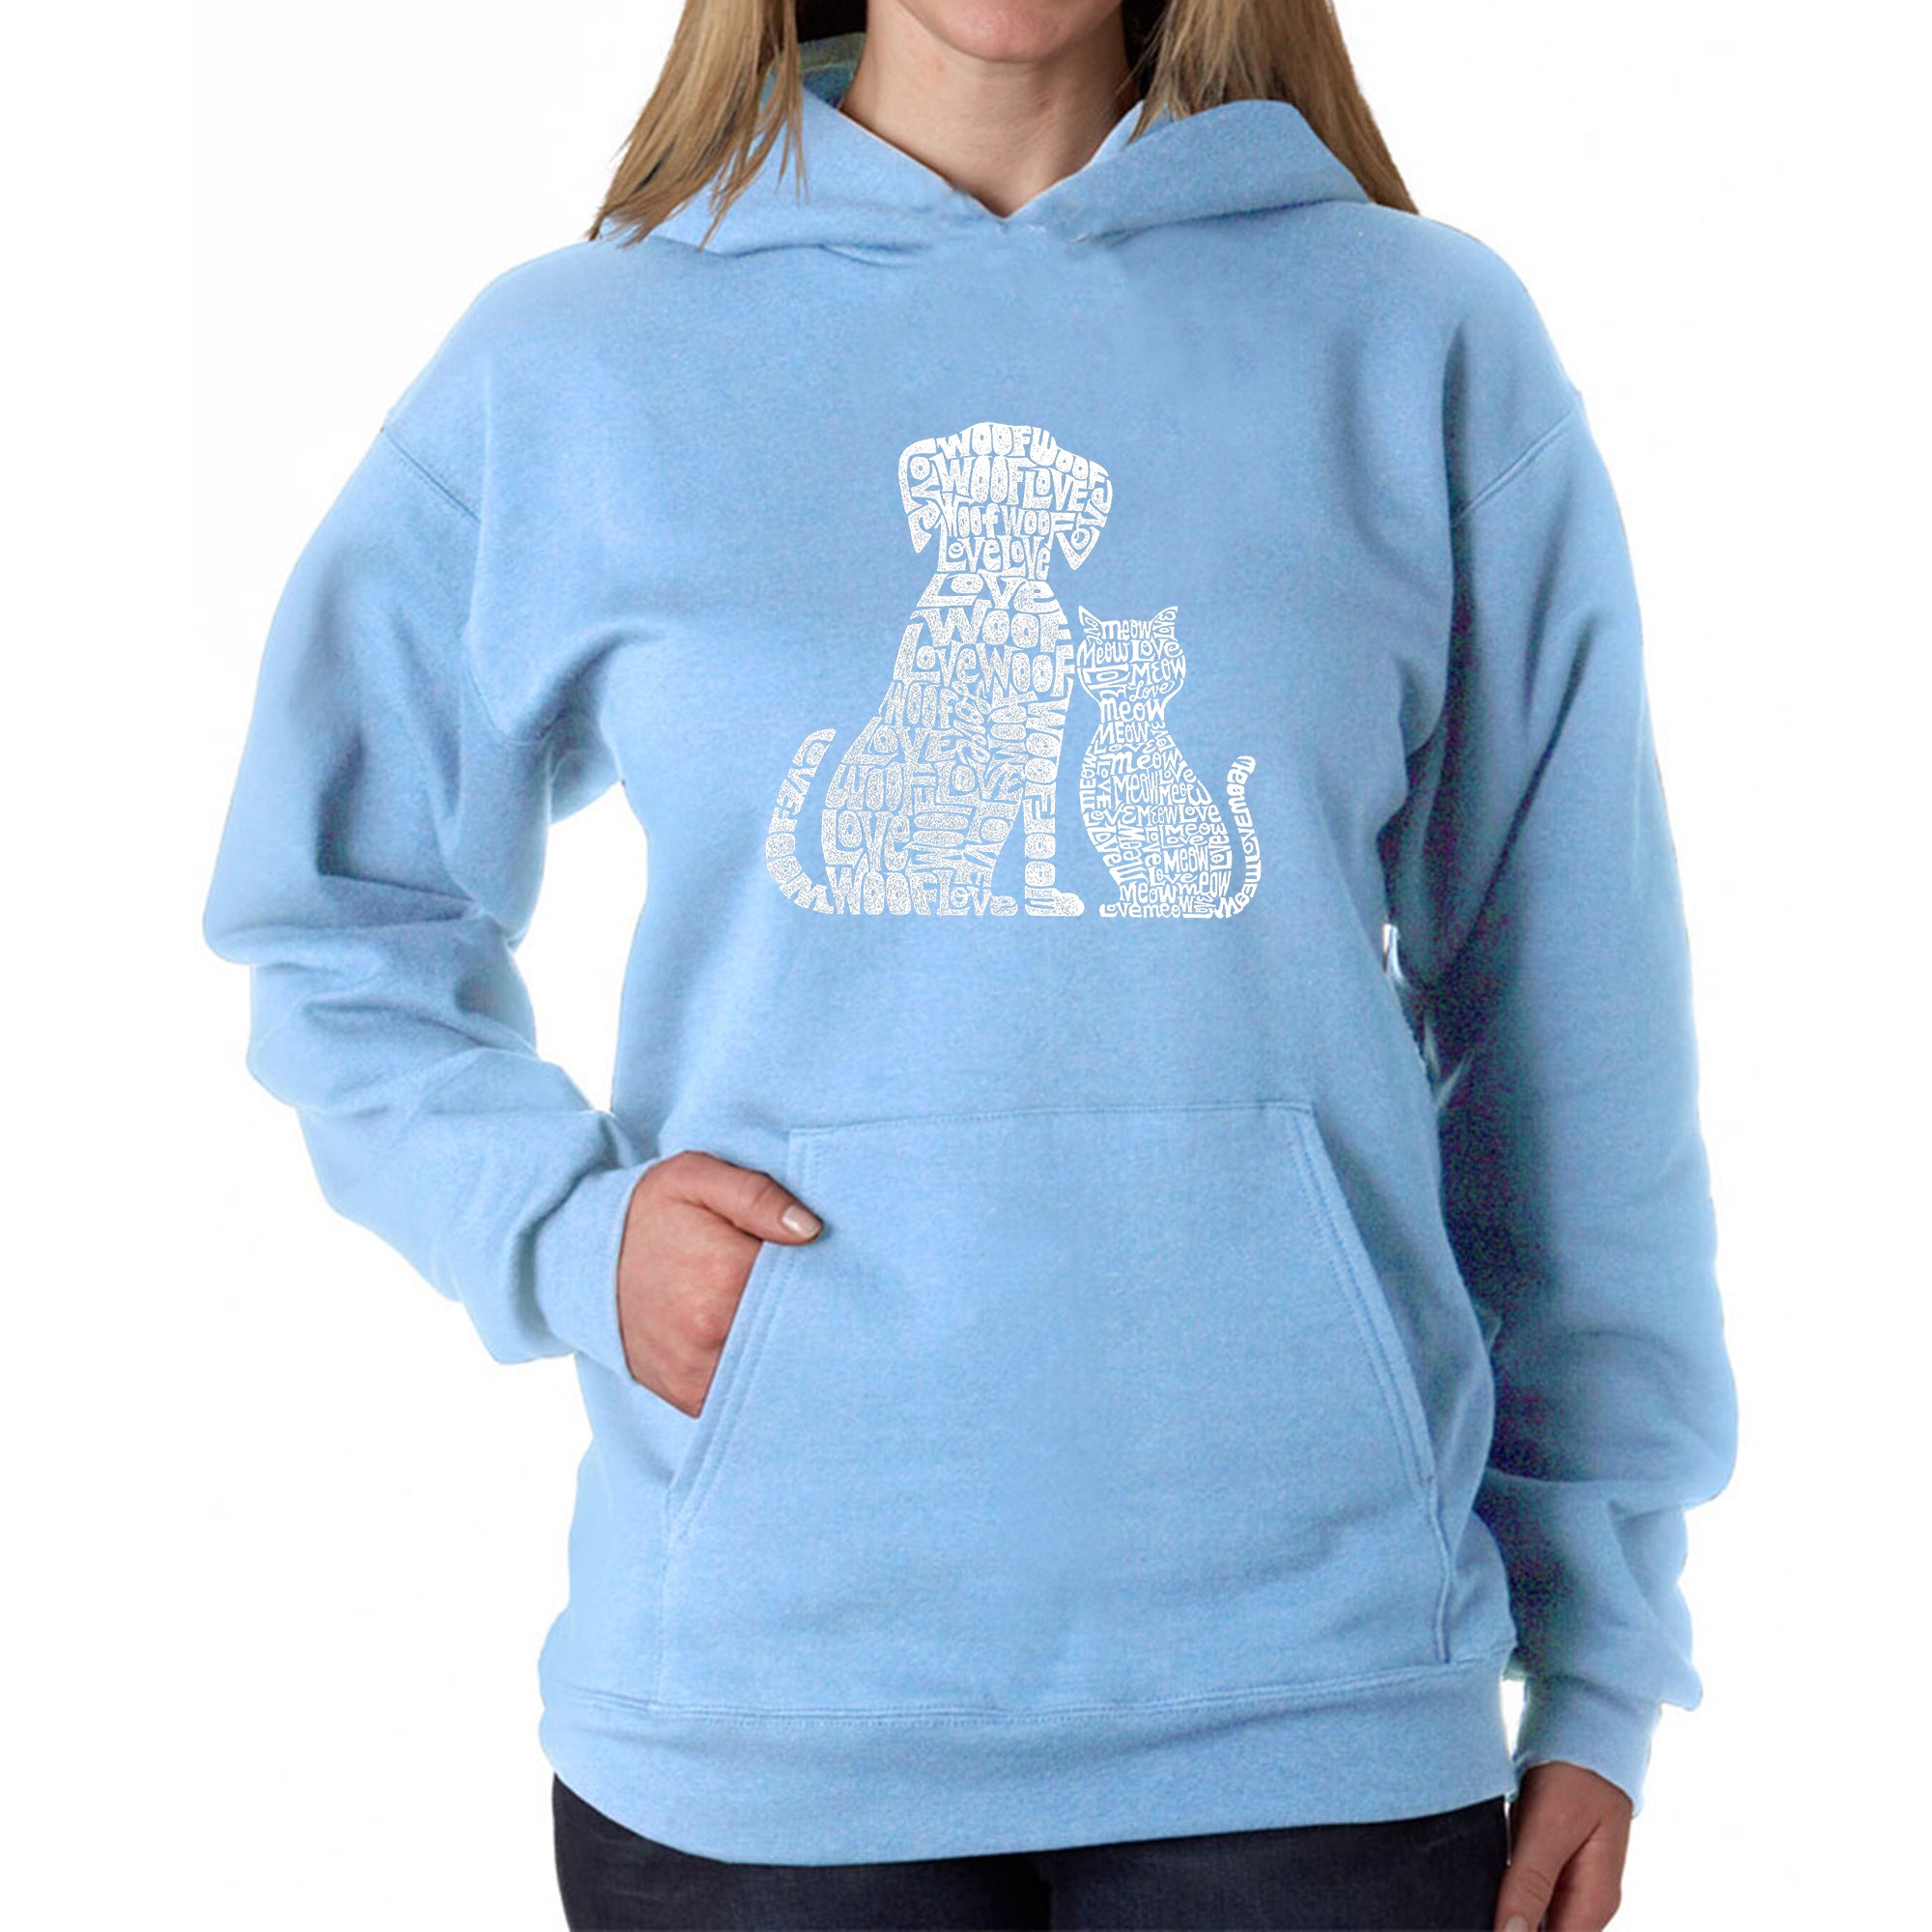 Dogs And Cats - Women's Word Art Hooded Sweatshirt - Blue - X-Large